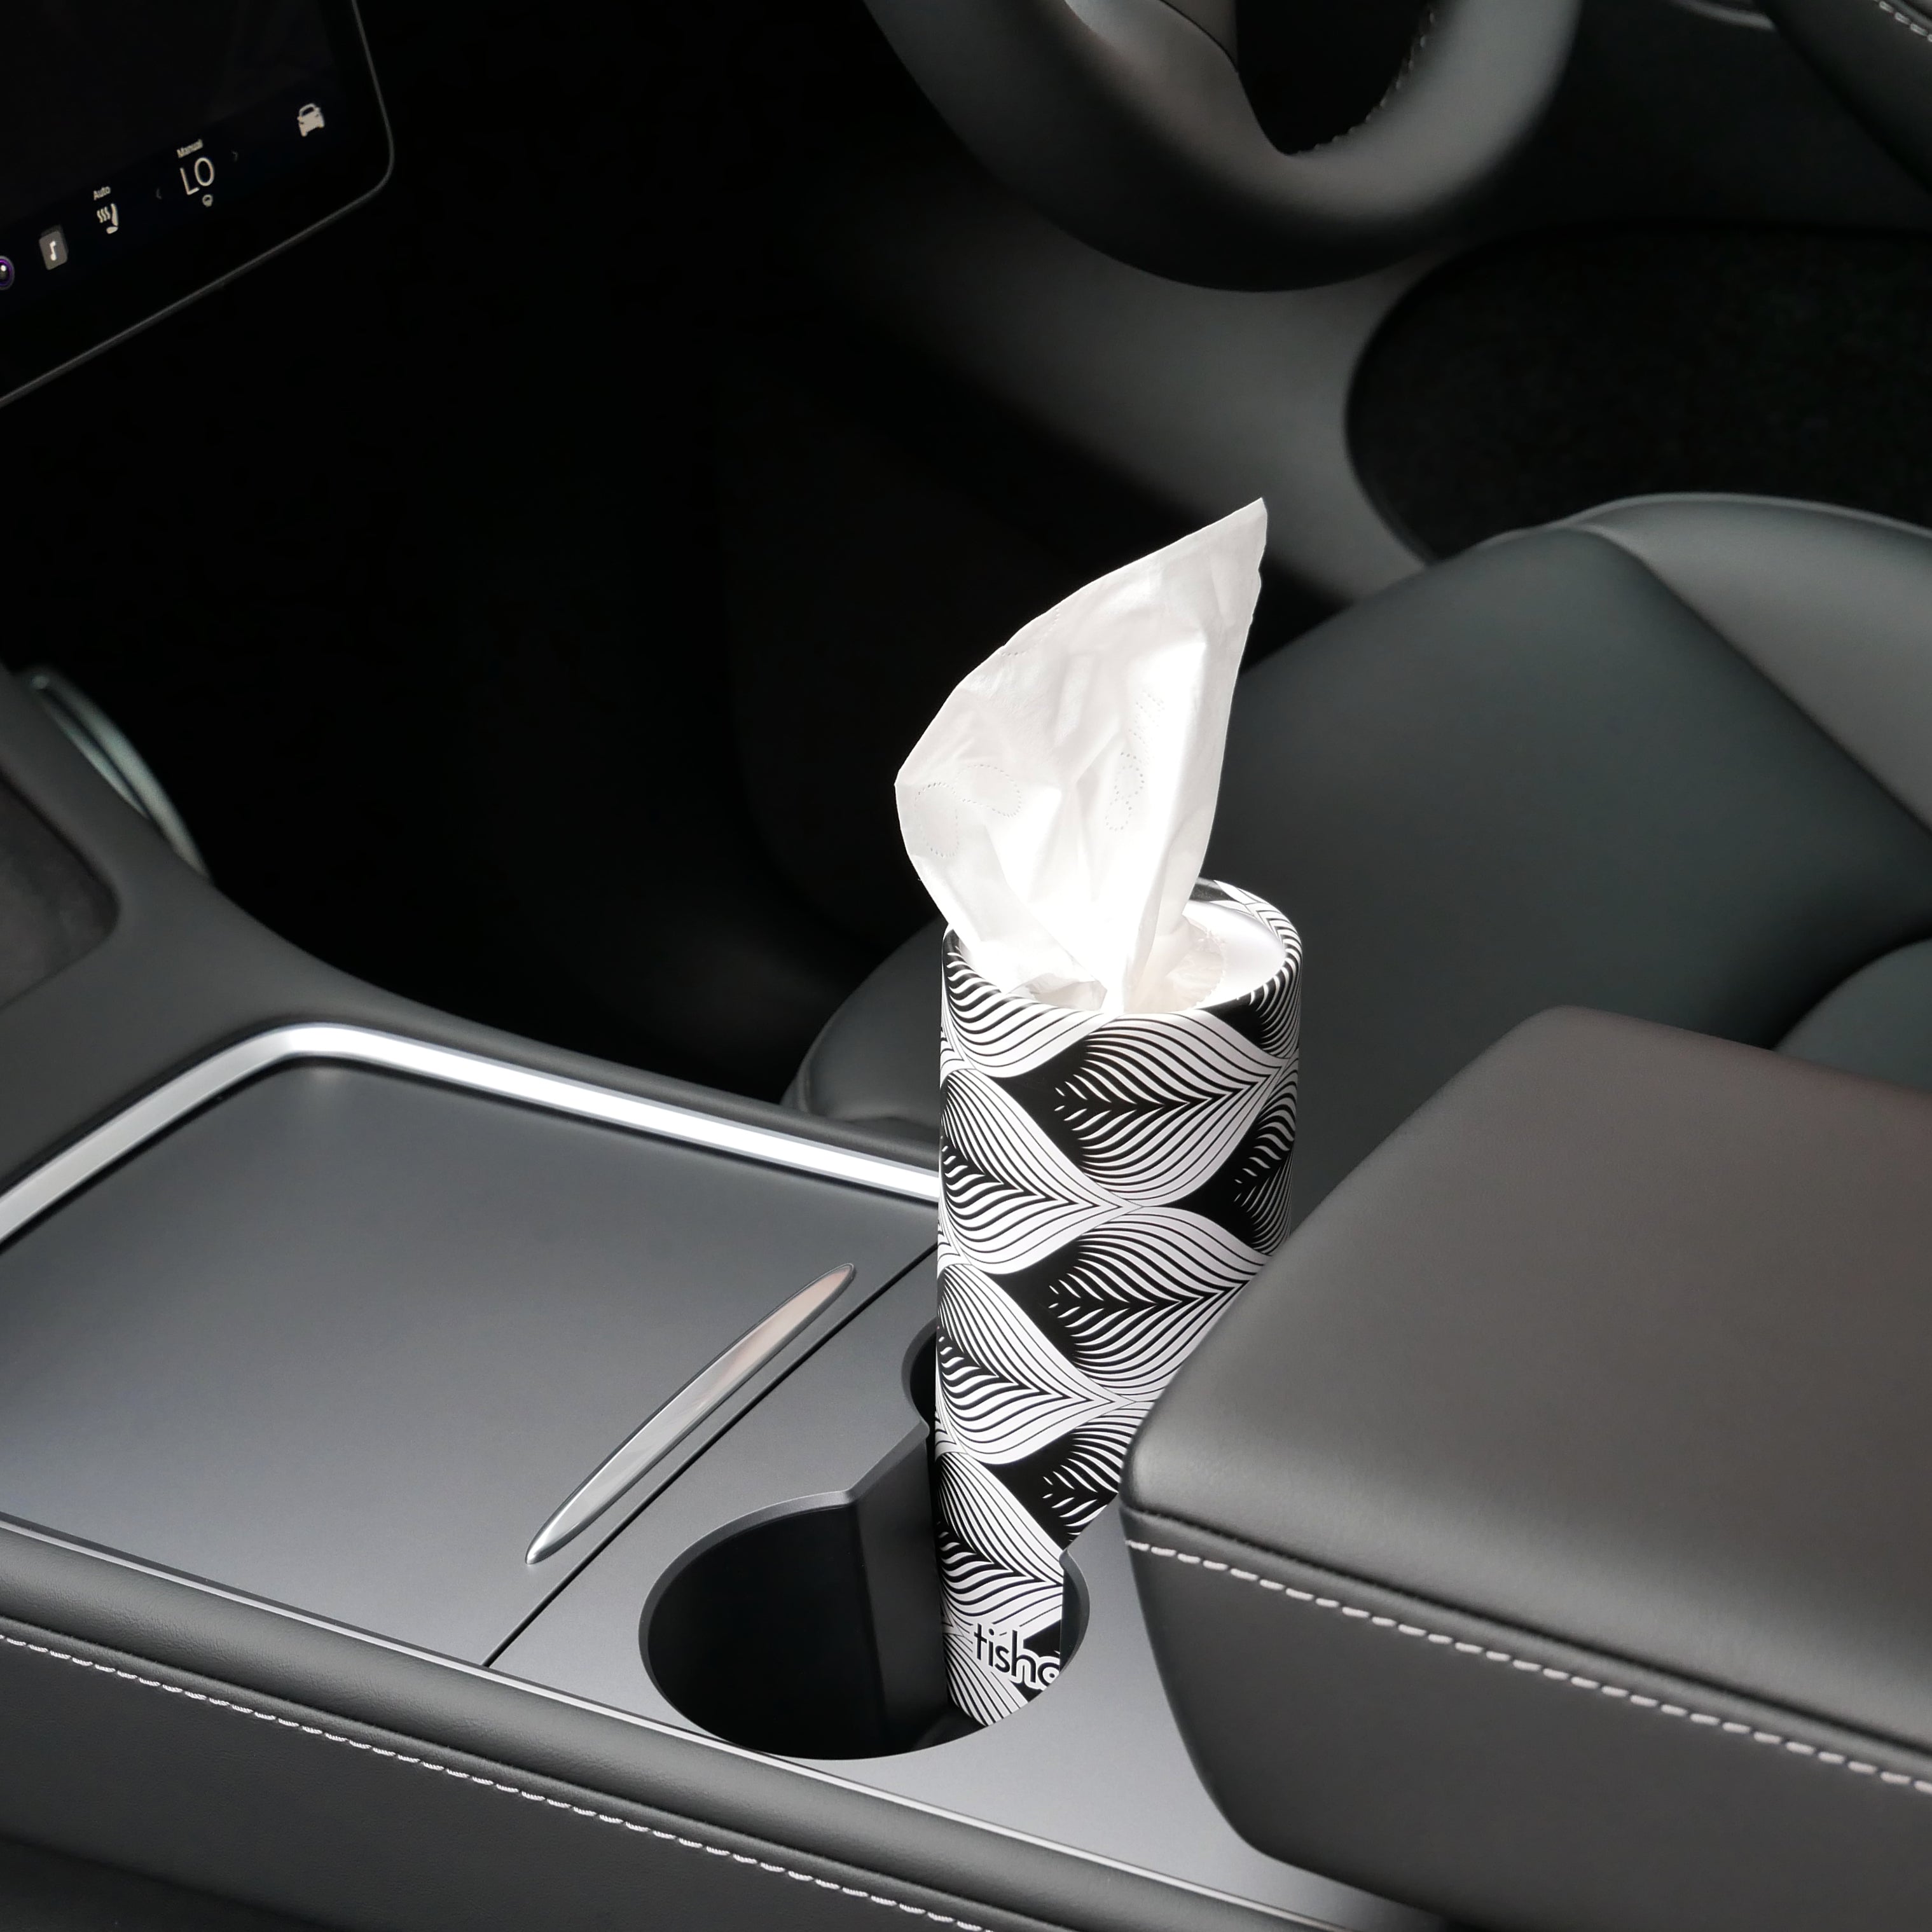 Supremely Soft Tissues for Car Cup Holders, Home & Travel - tishoo